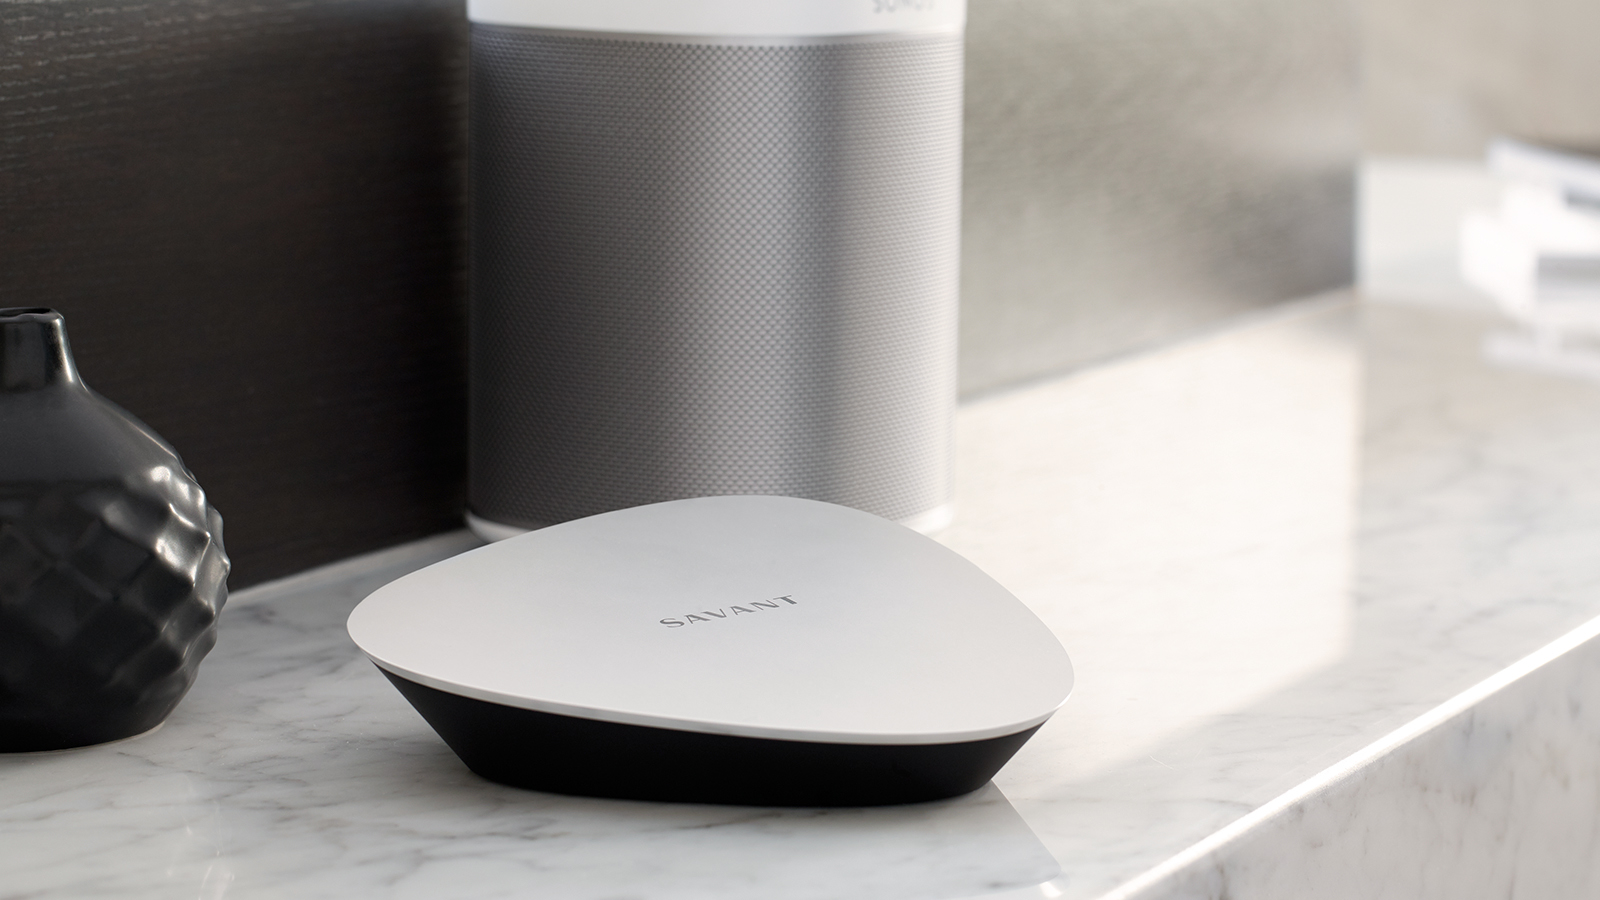 Savant Takes A Simple But Elegant Approach To Home Automation